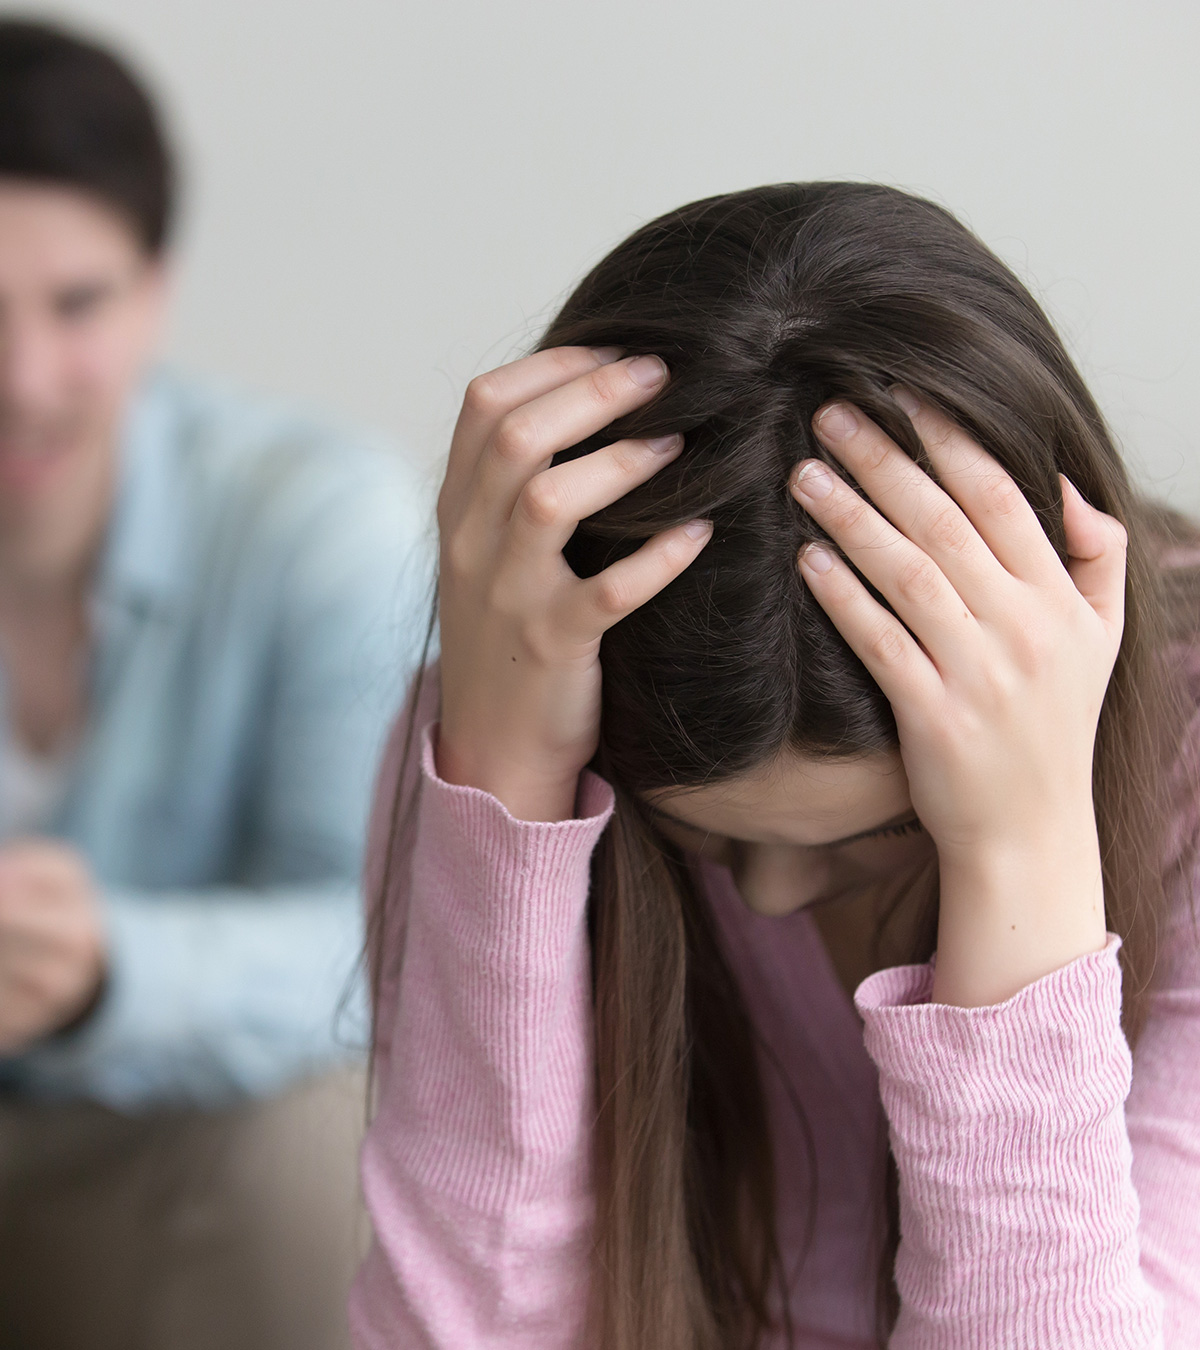 12 Reasons Why Women Stay In Abusive Relationships